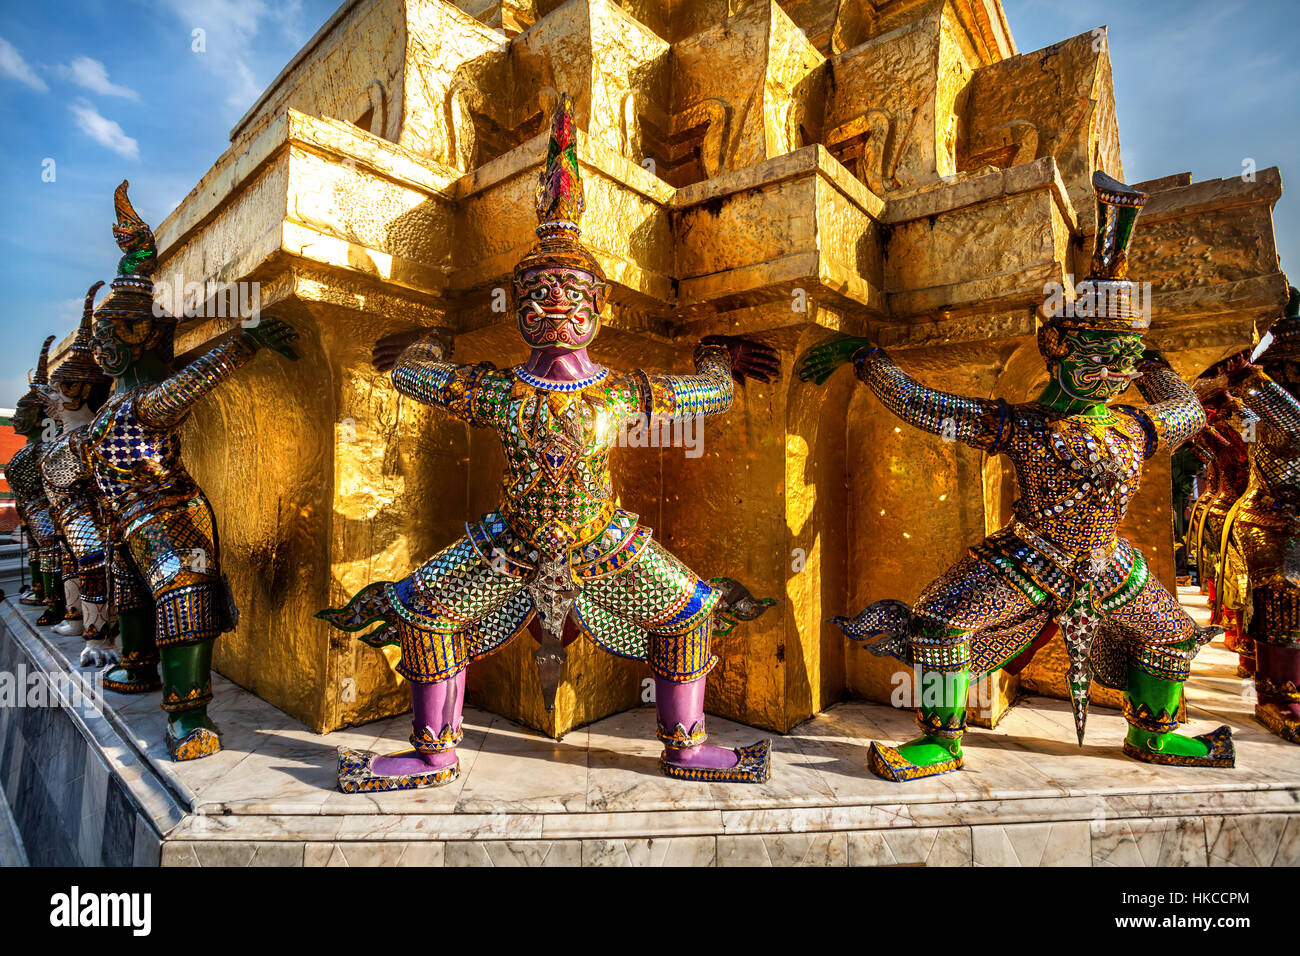 Demon golden statues support pyramid at Wat Phra Kaew in Grand Palace in Bangkok, Thailand Stock Photo